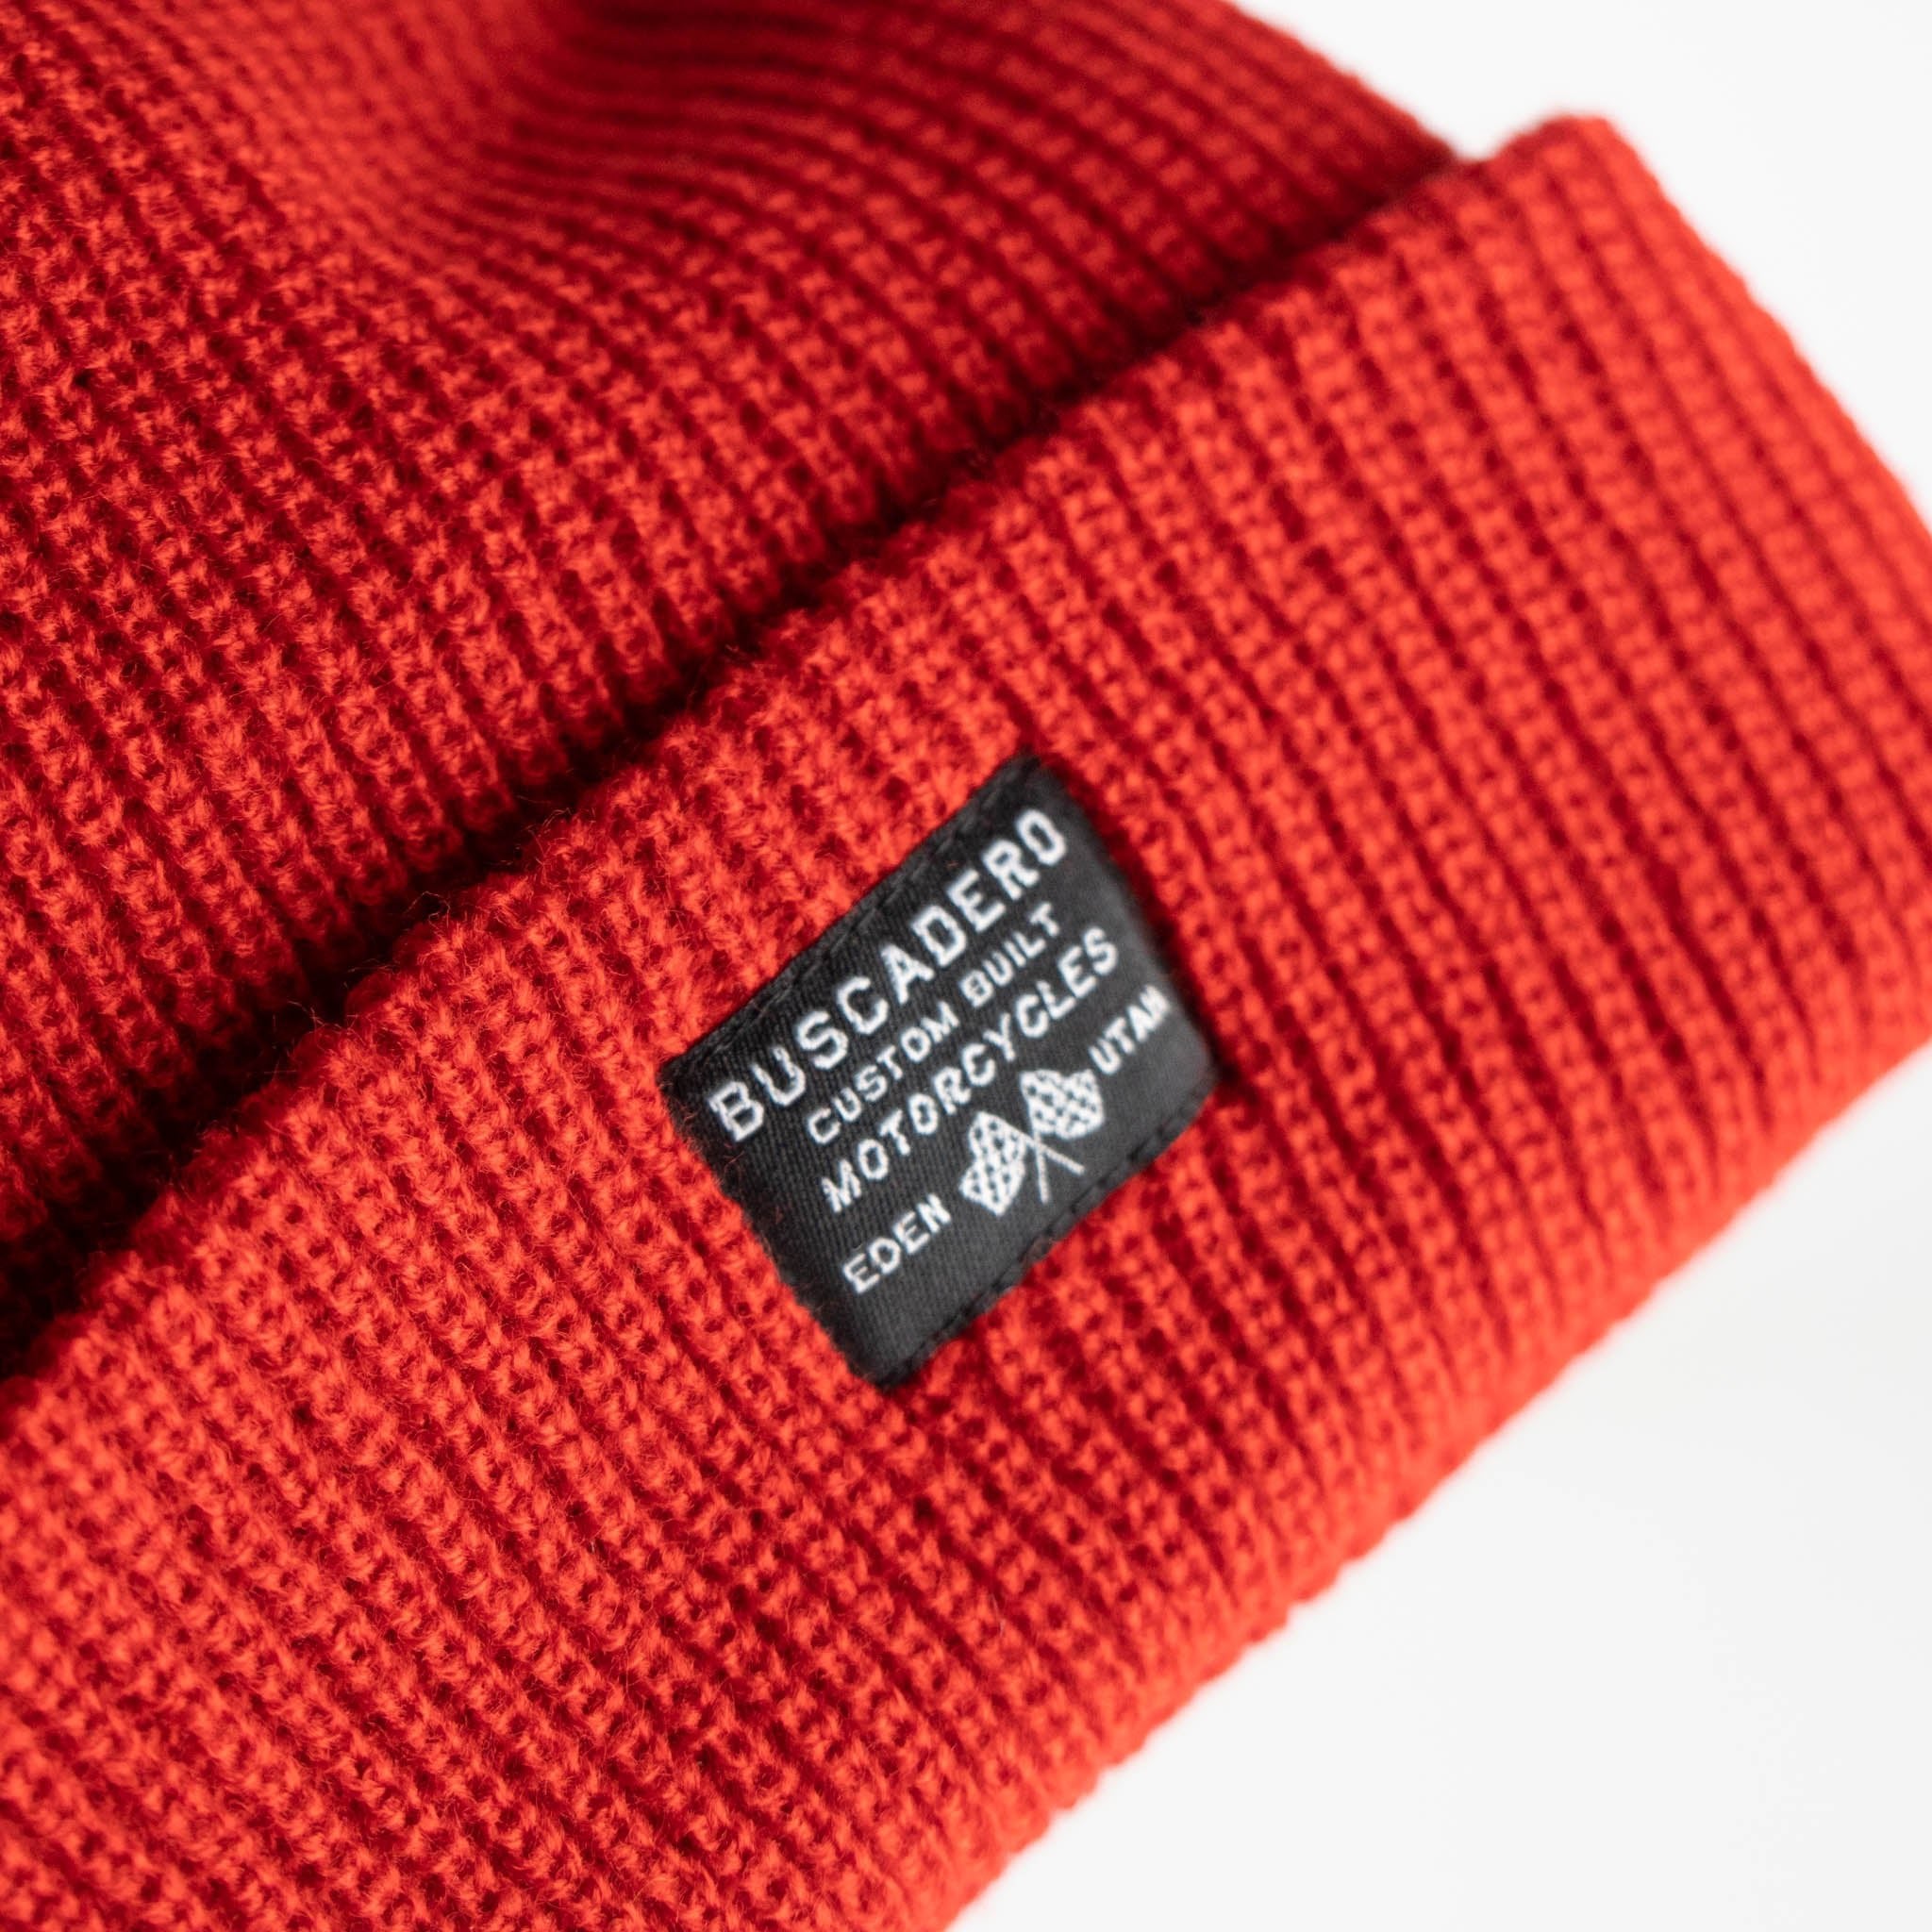 'Flags’ Cuff Beanie - Red - Buscadero Motorcycles